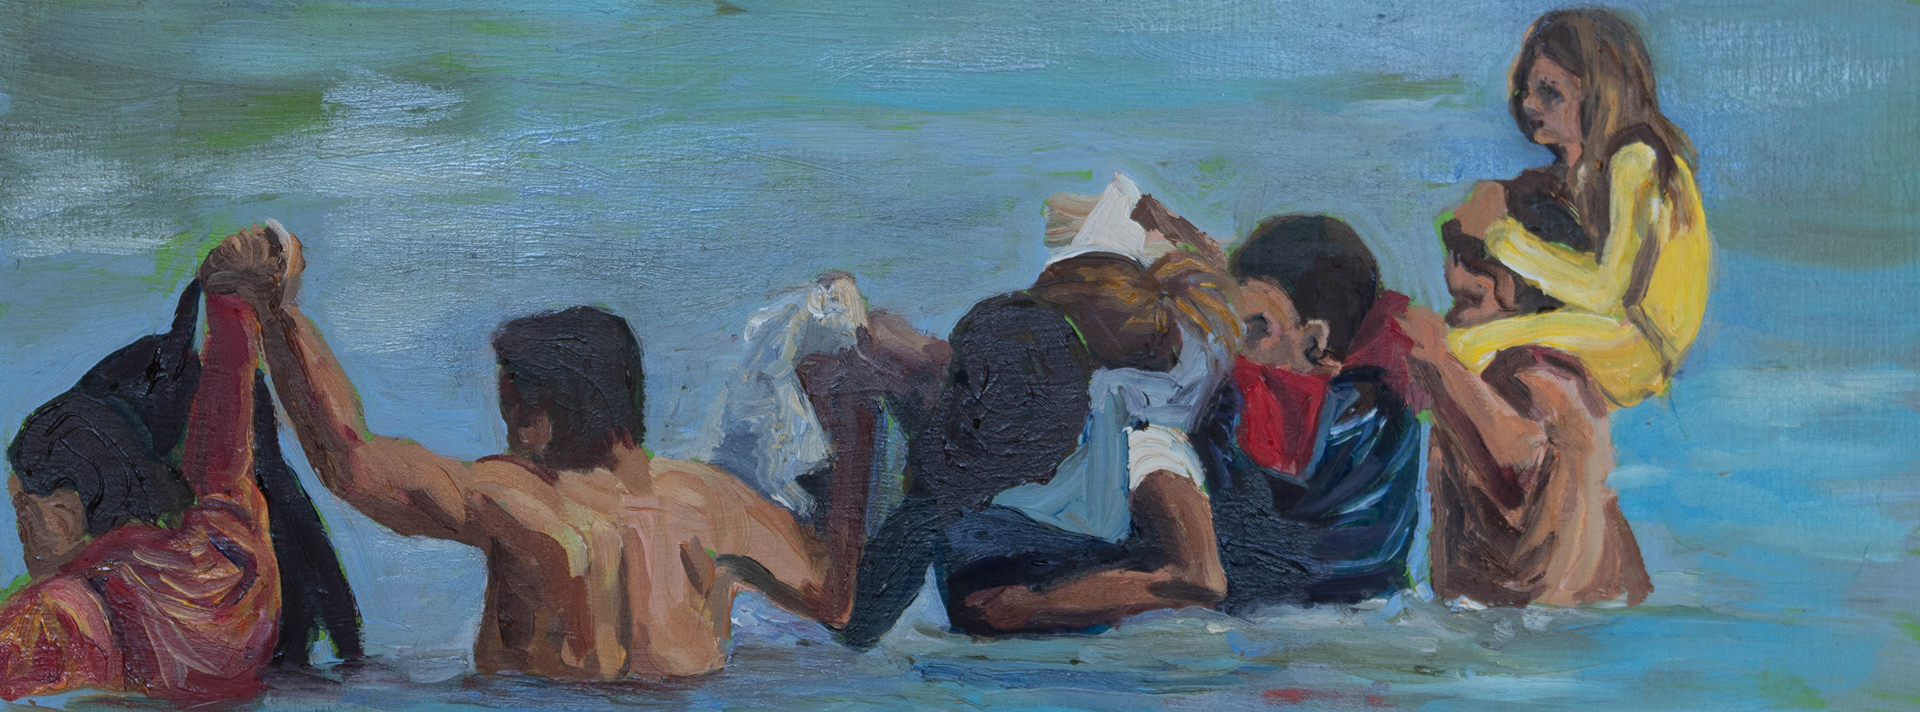 Header A Painting Of A Line Of People Wading Through Chest High Water A Child Sits On The Shoulders Of One Person